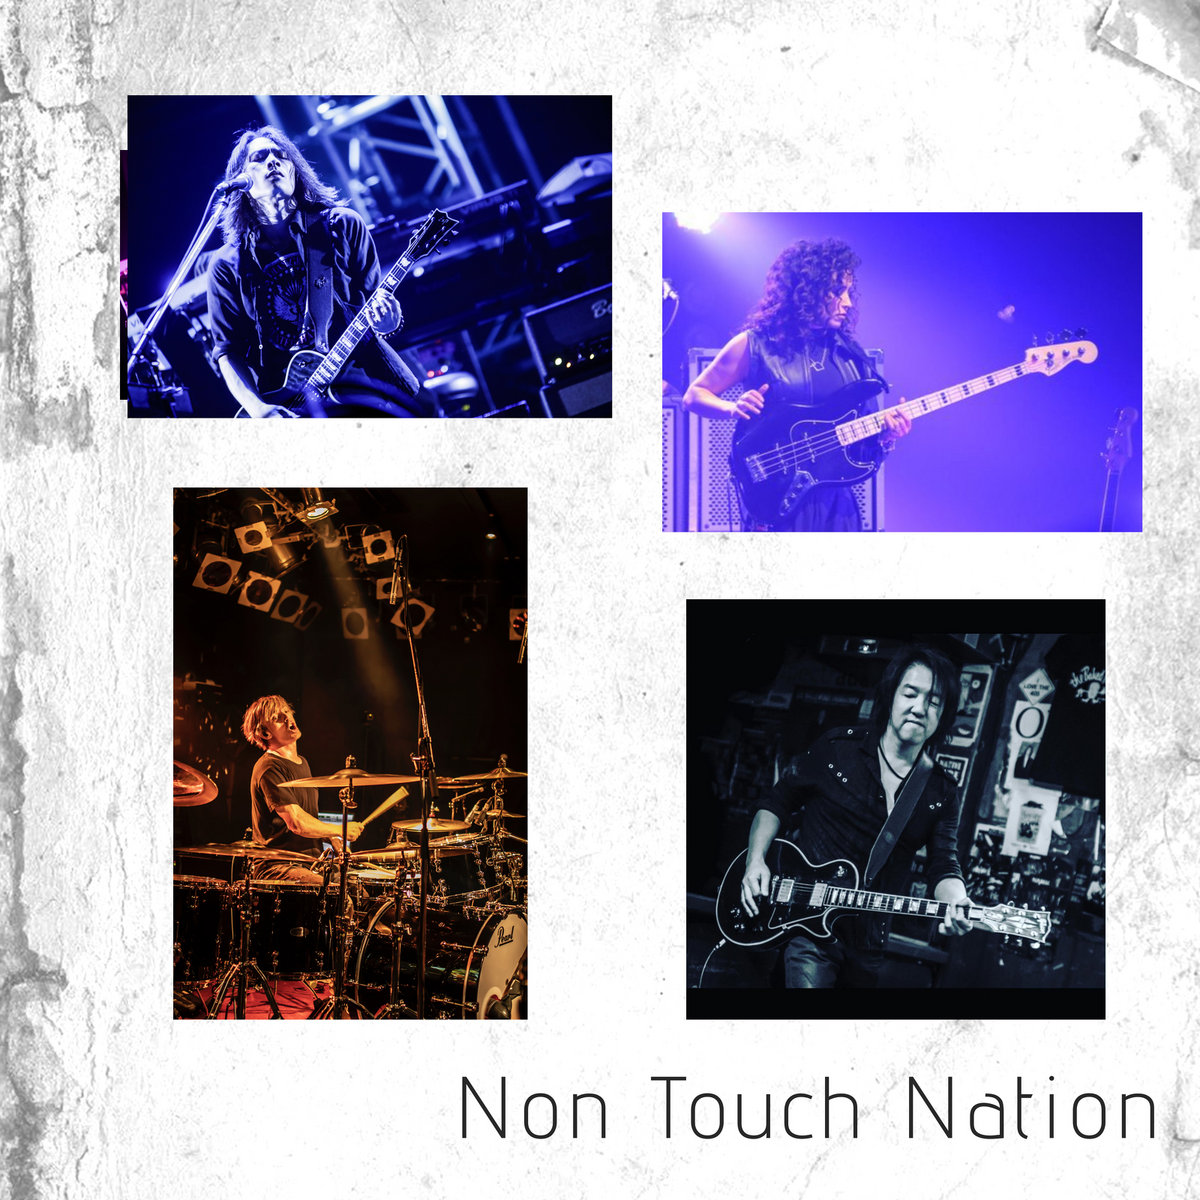 NON TOUCH NATION